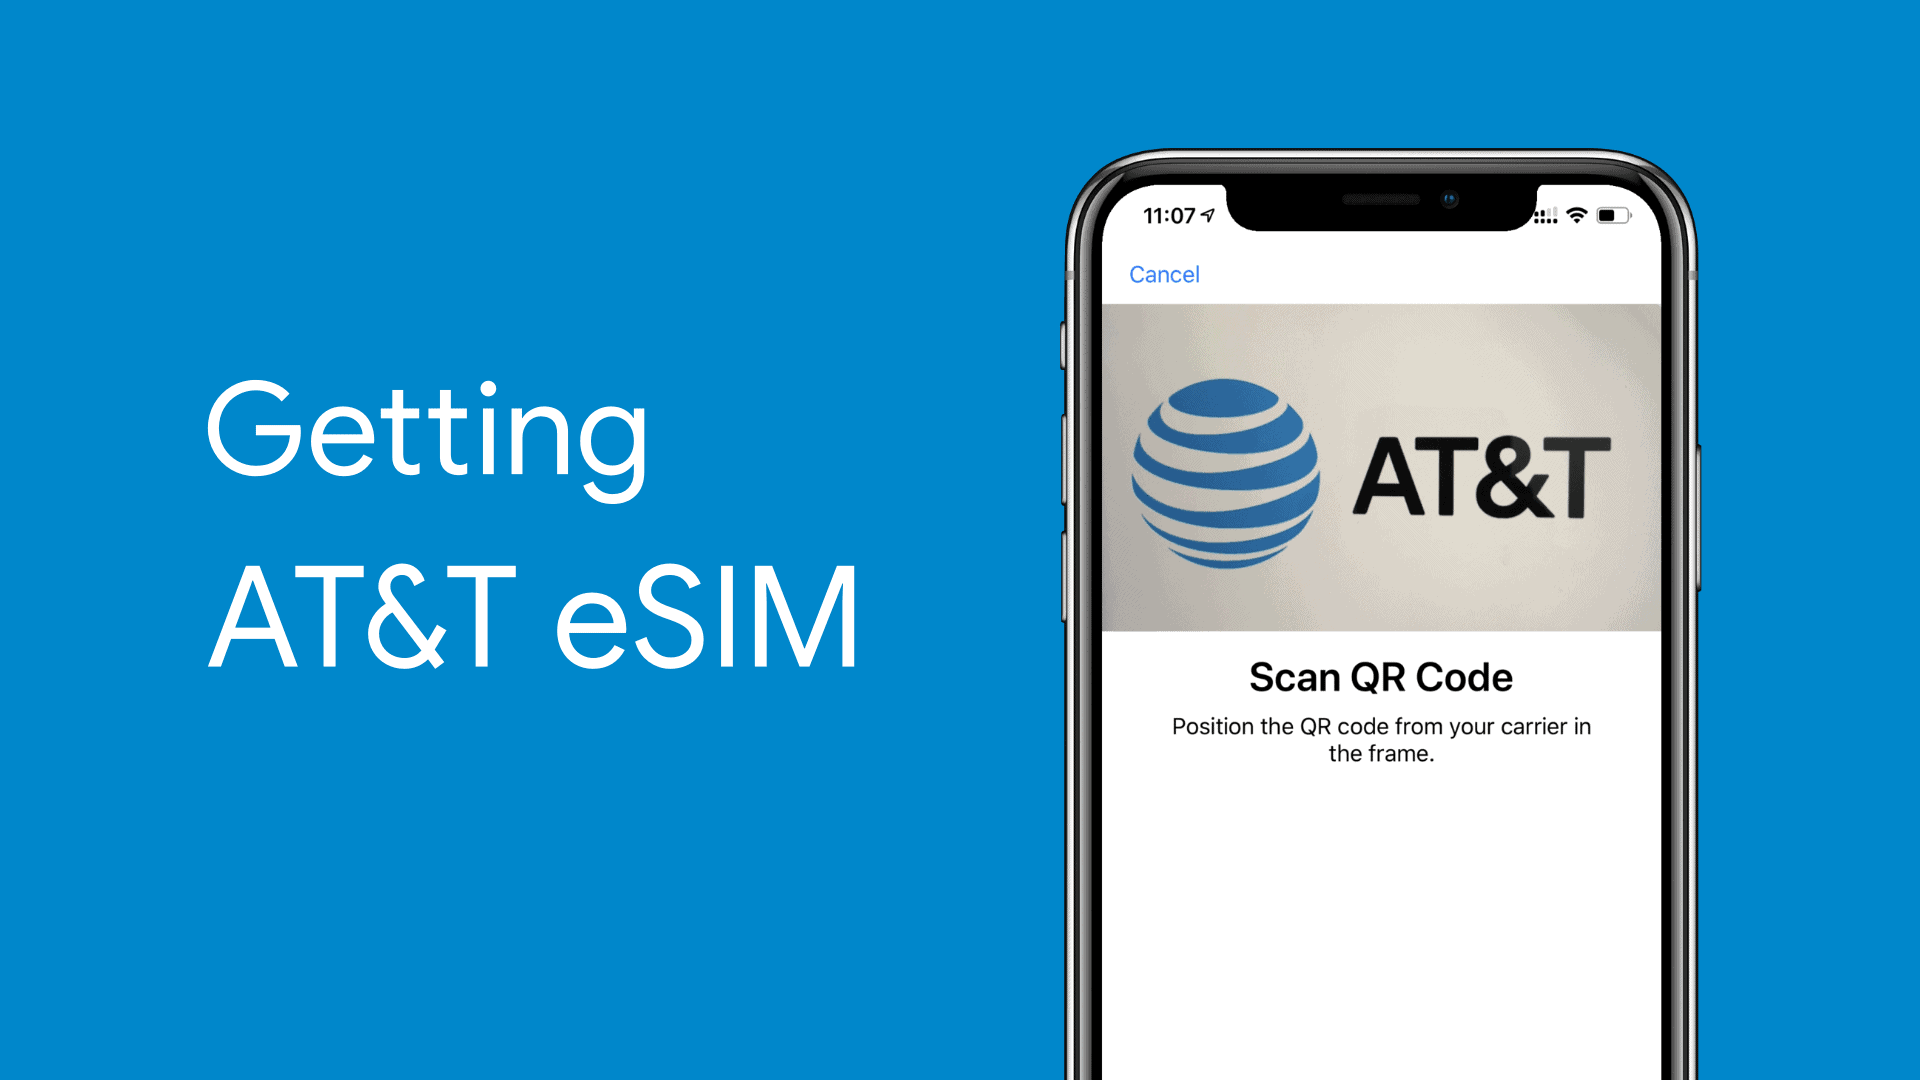 How to get AT&T eSIM for iPhone XS and iPhone XR